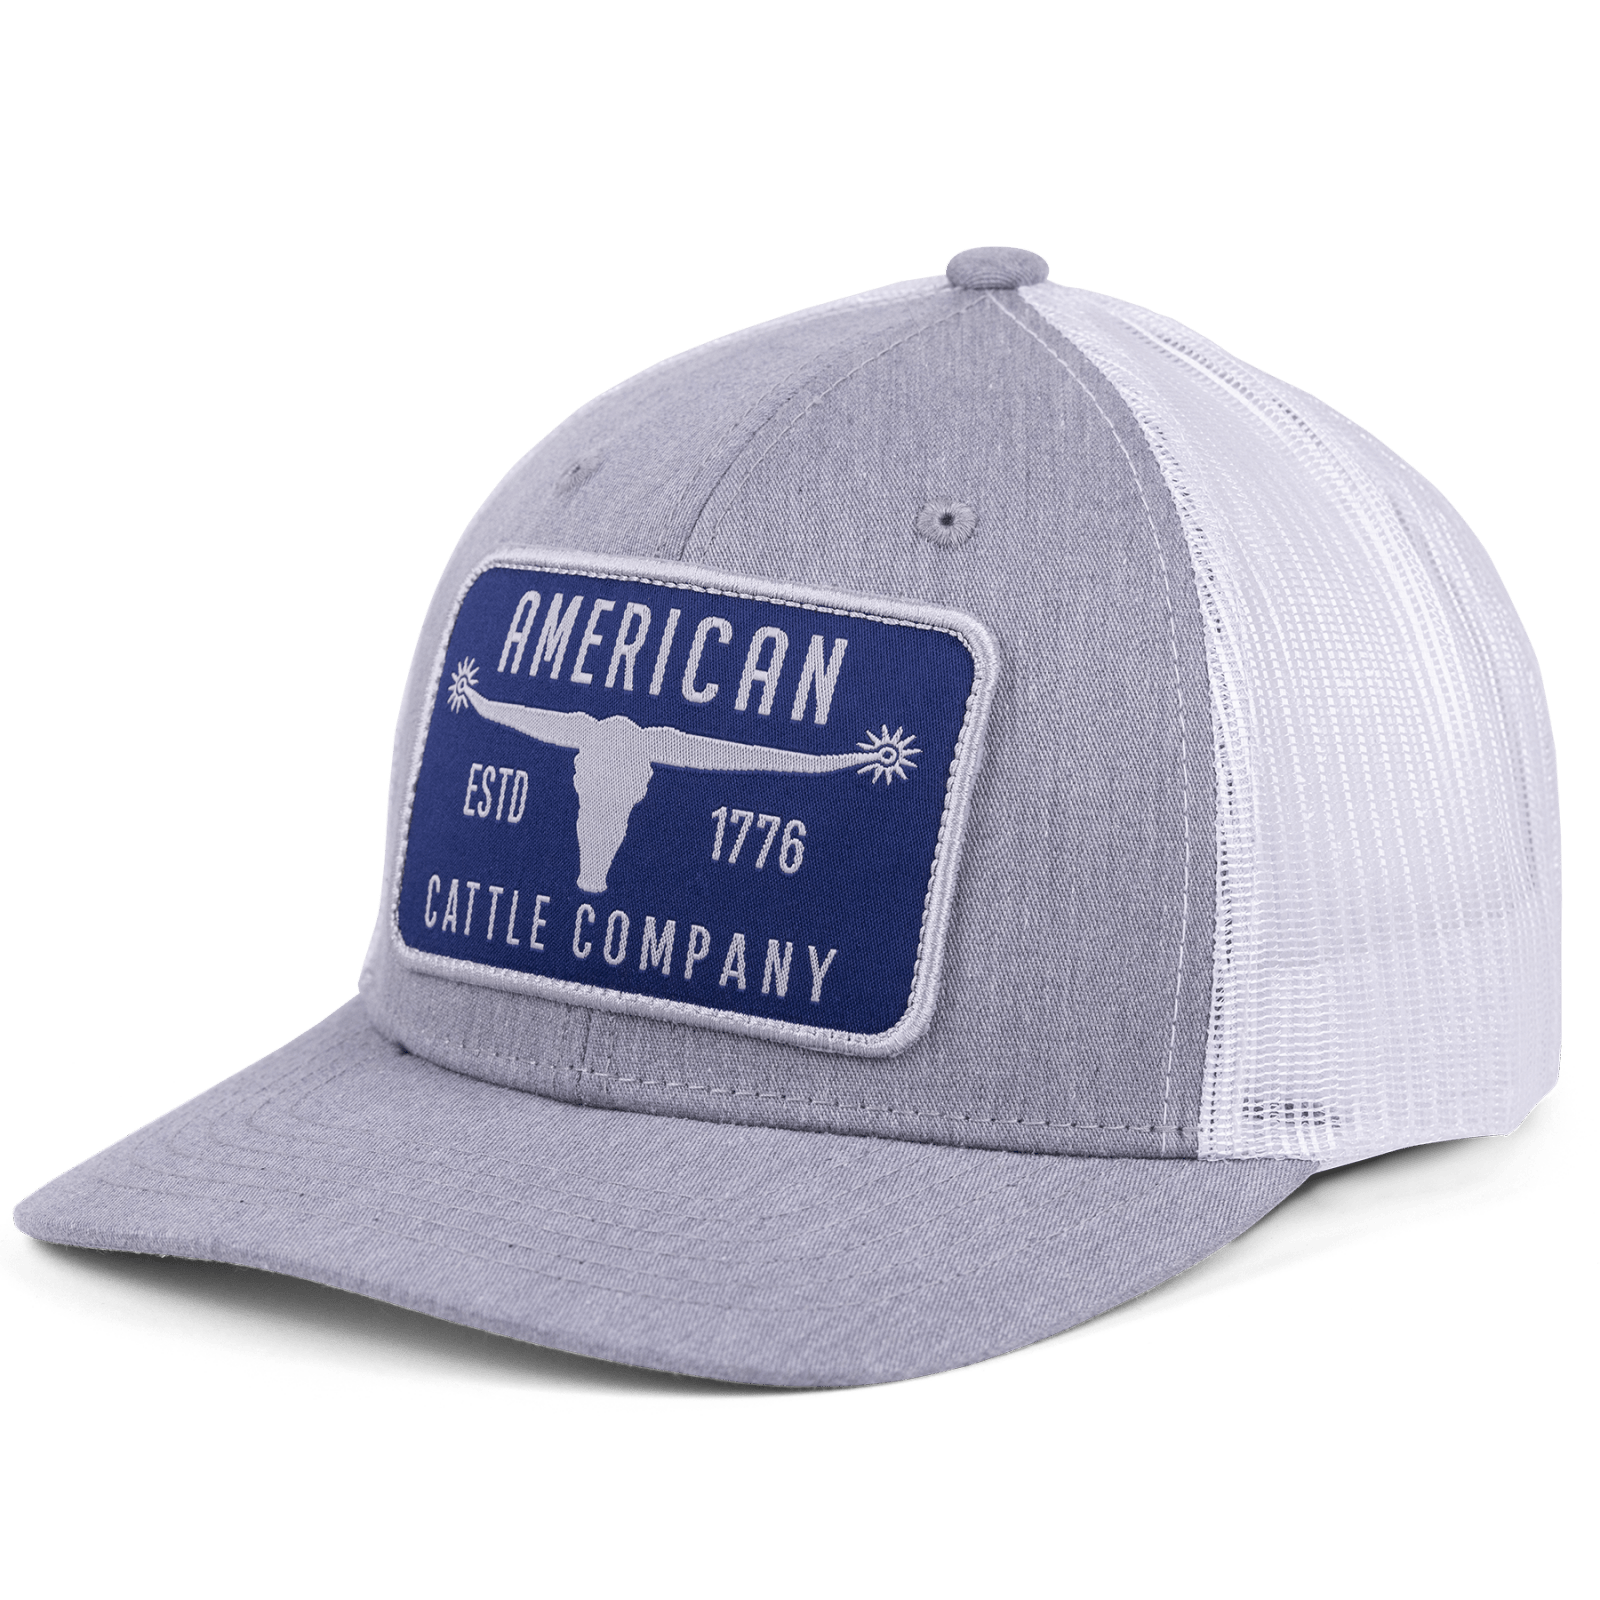 Rural Cloth Hats Bull Spurs Hat-Gray with Blue Patch